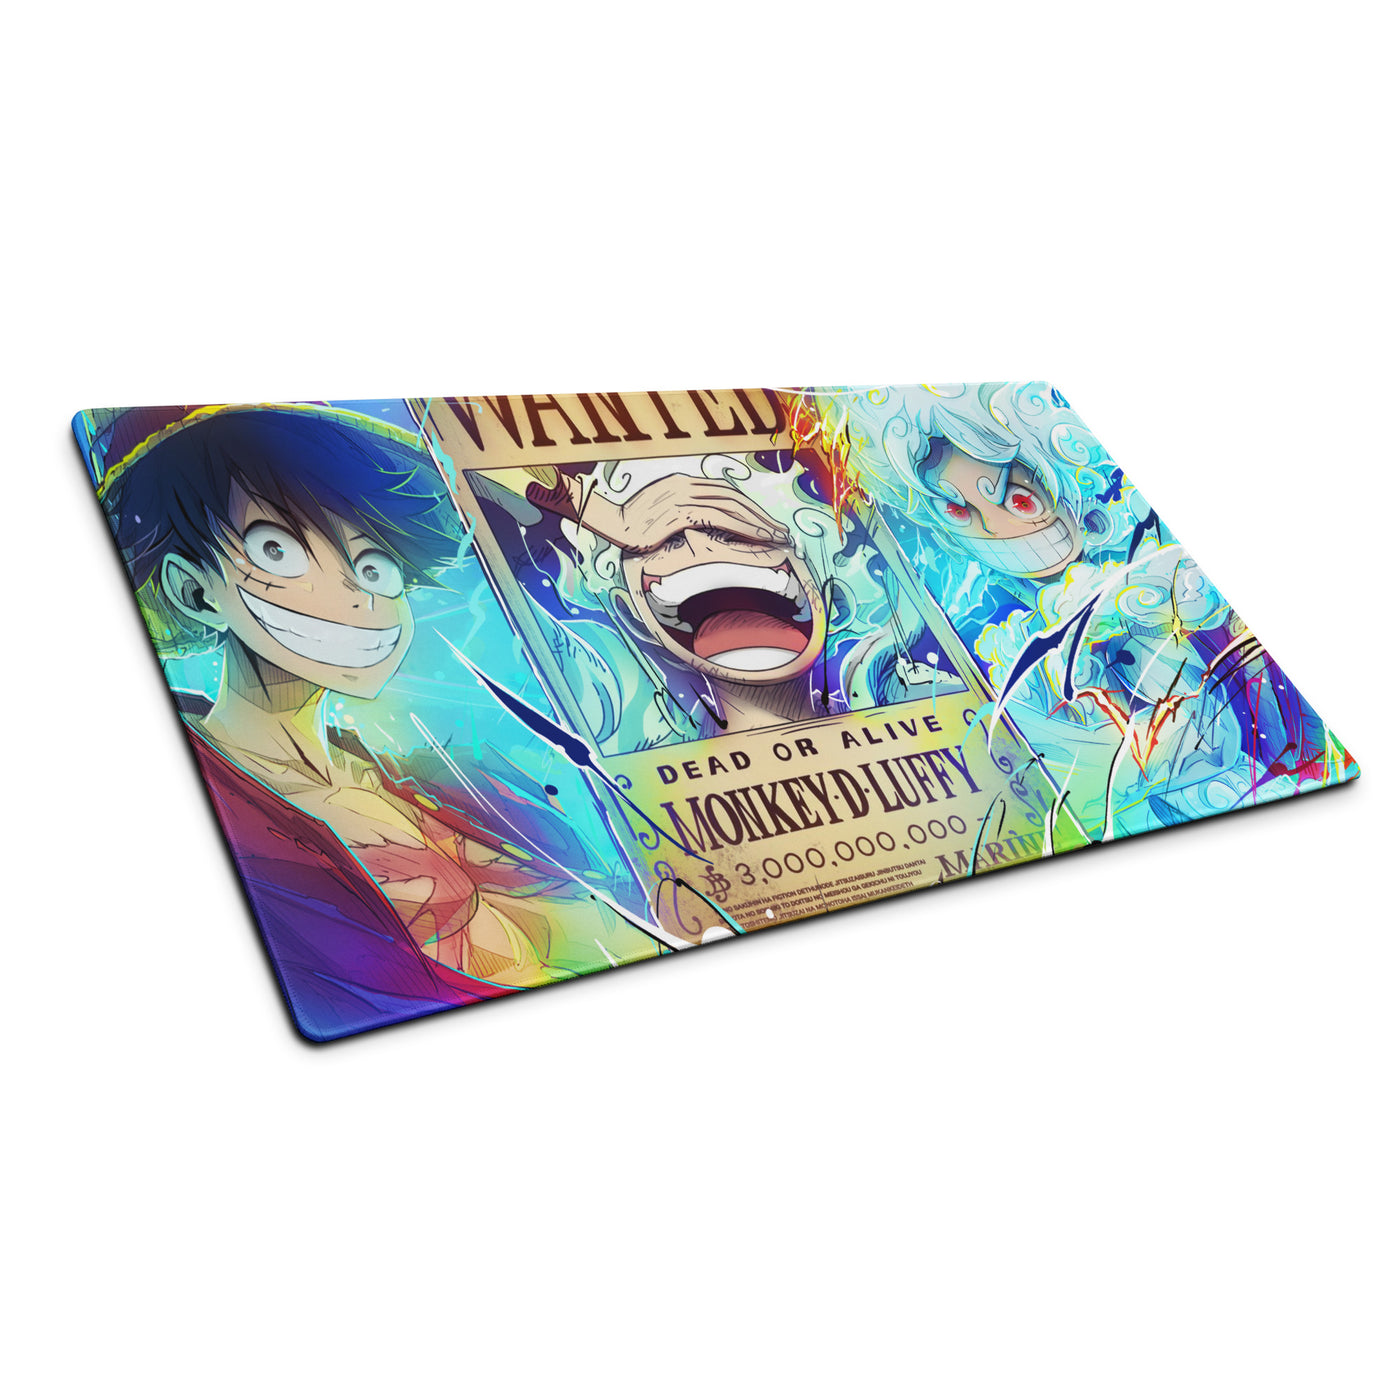 Gear Fifth Luffy Gaming mouse pad